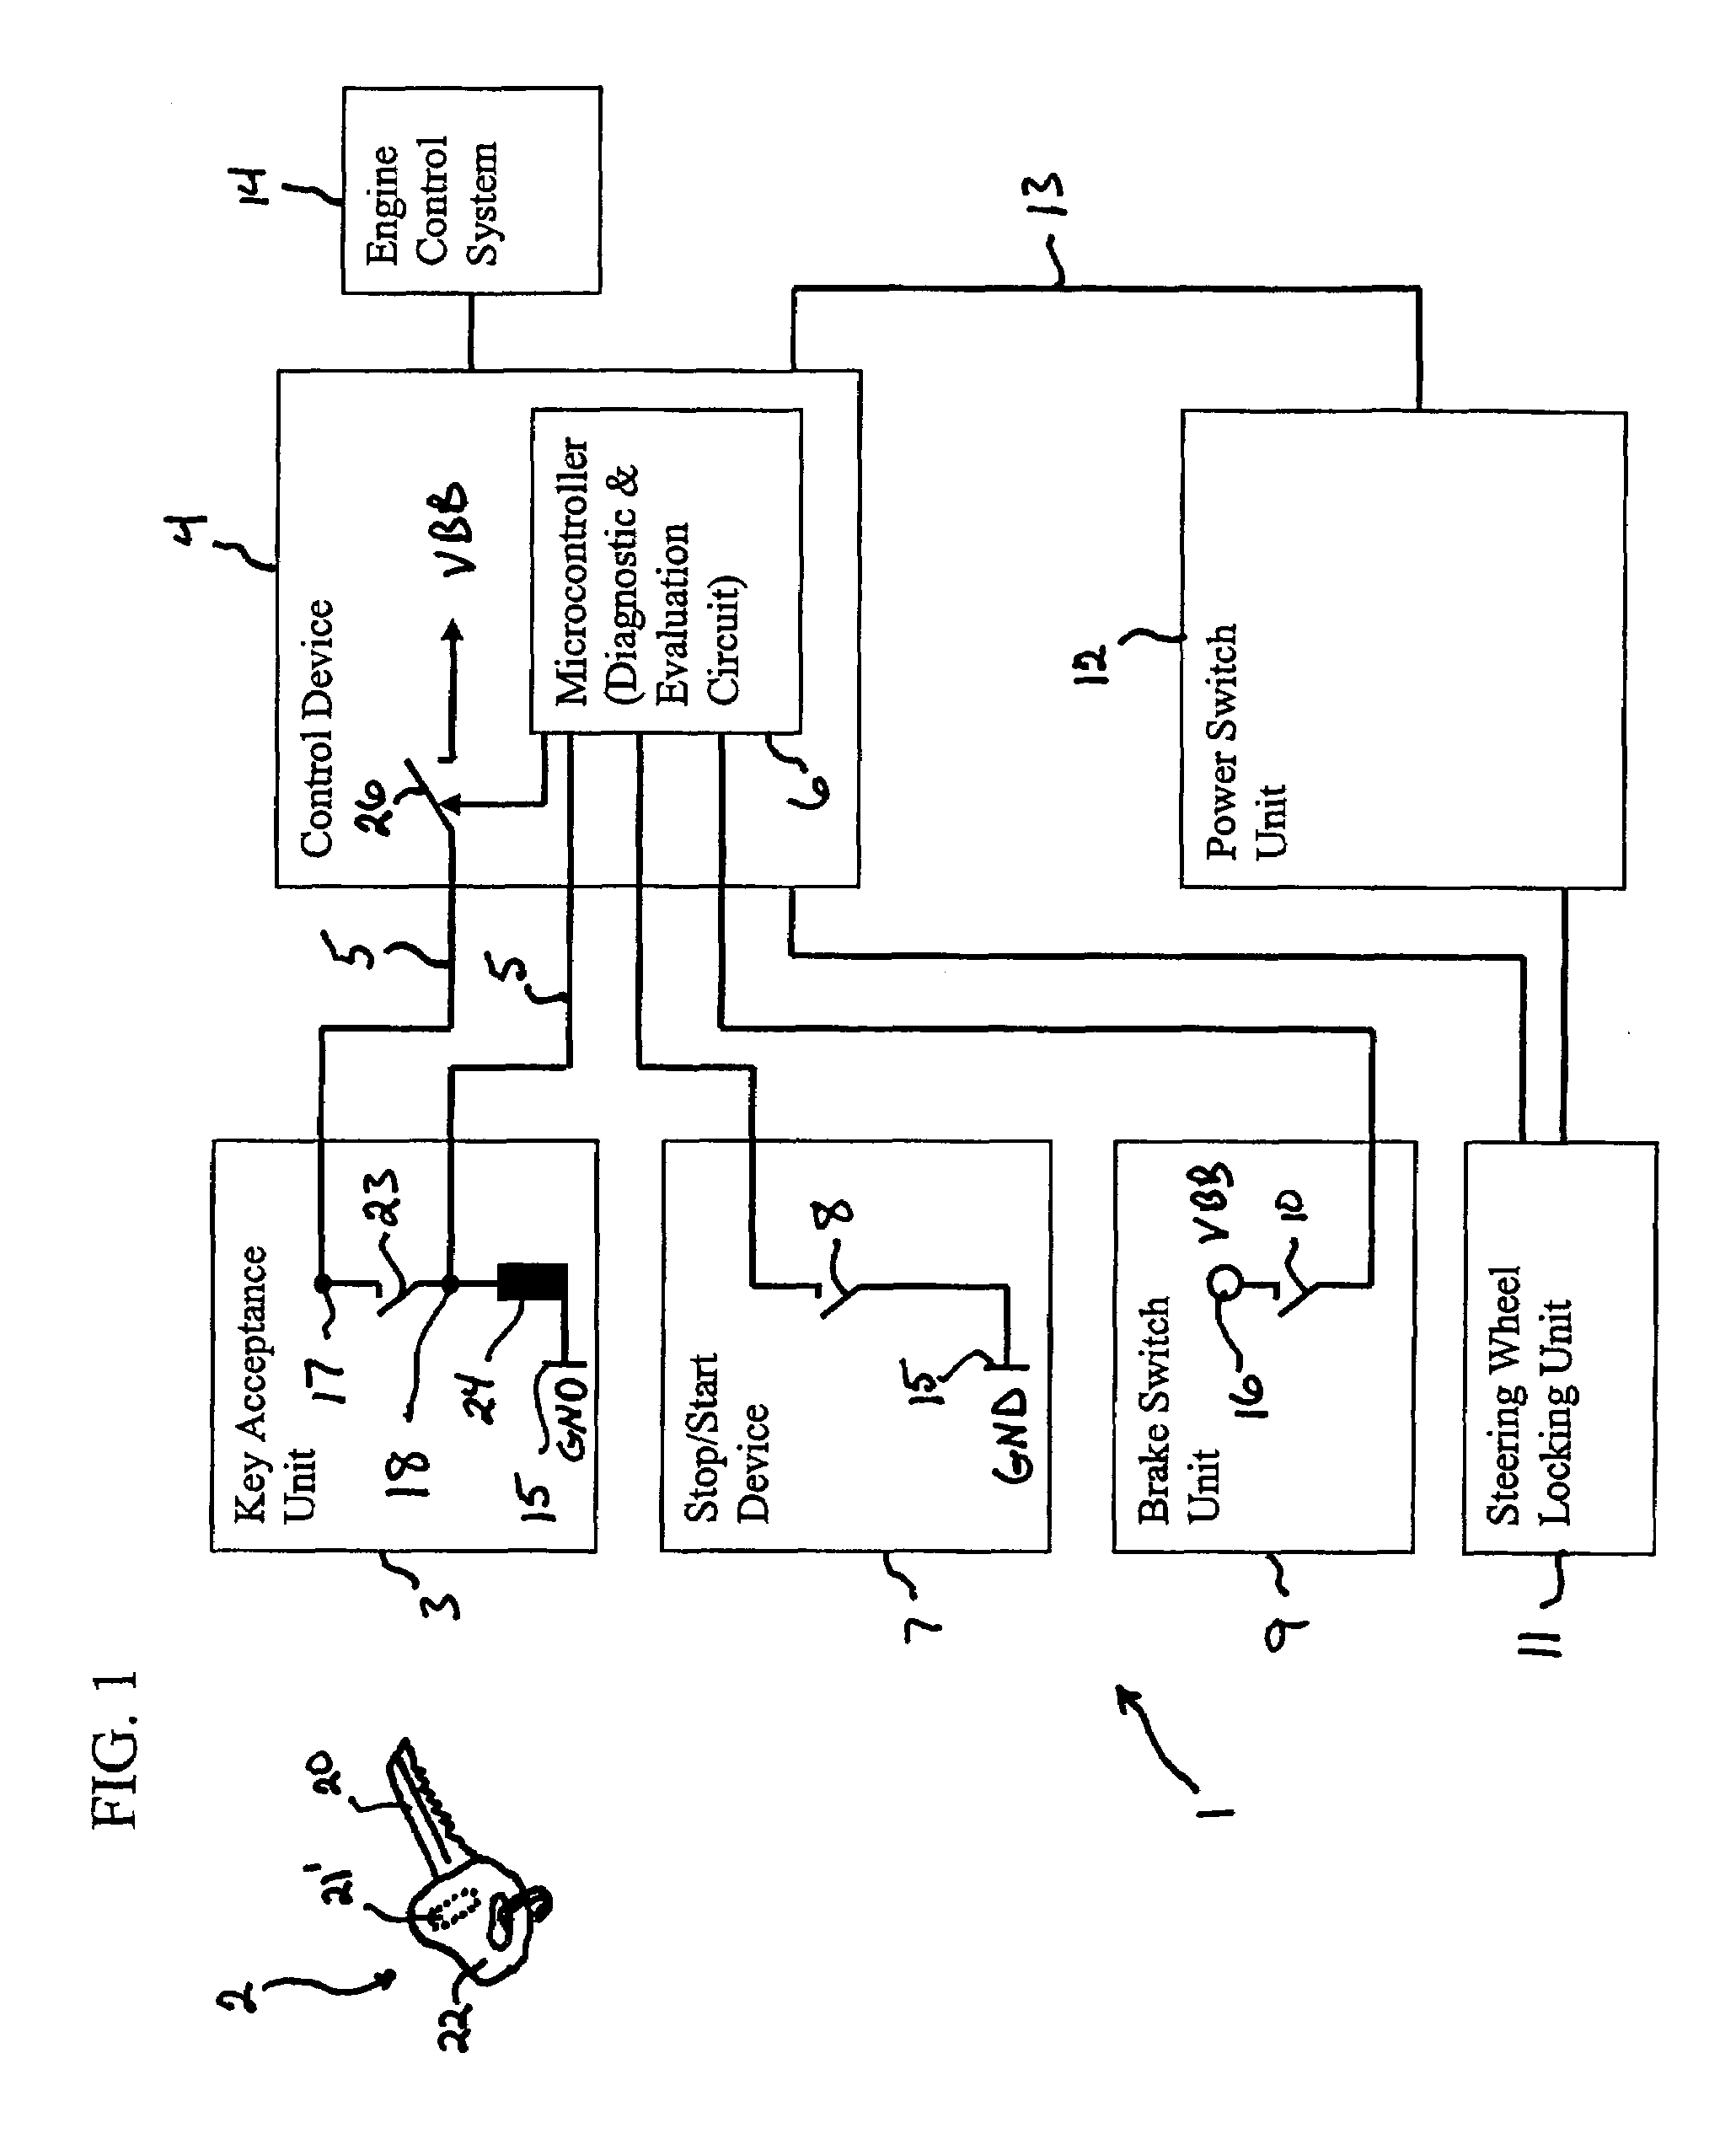 Access authorization and right of use system, of a motor vehicle